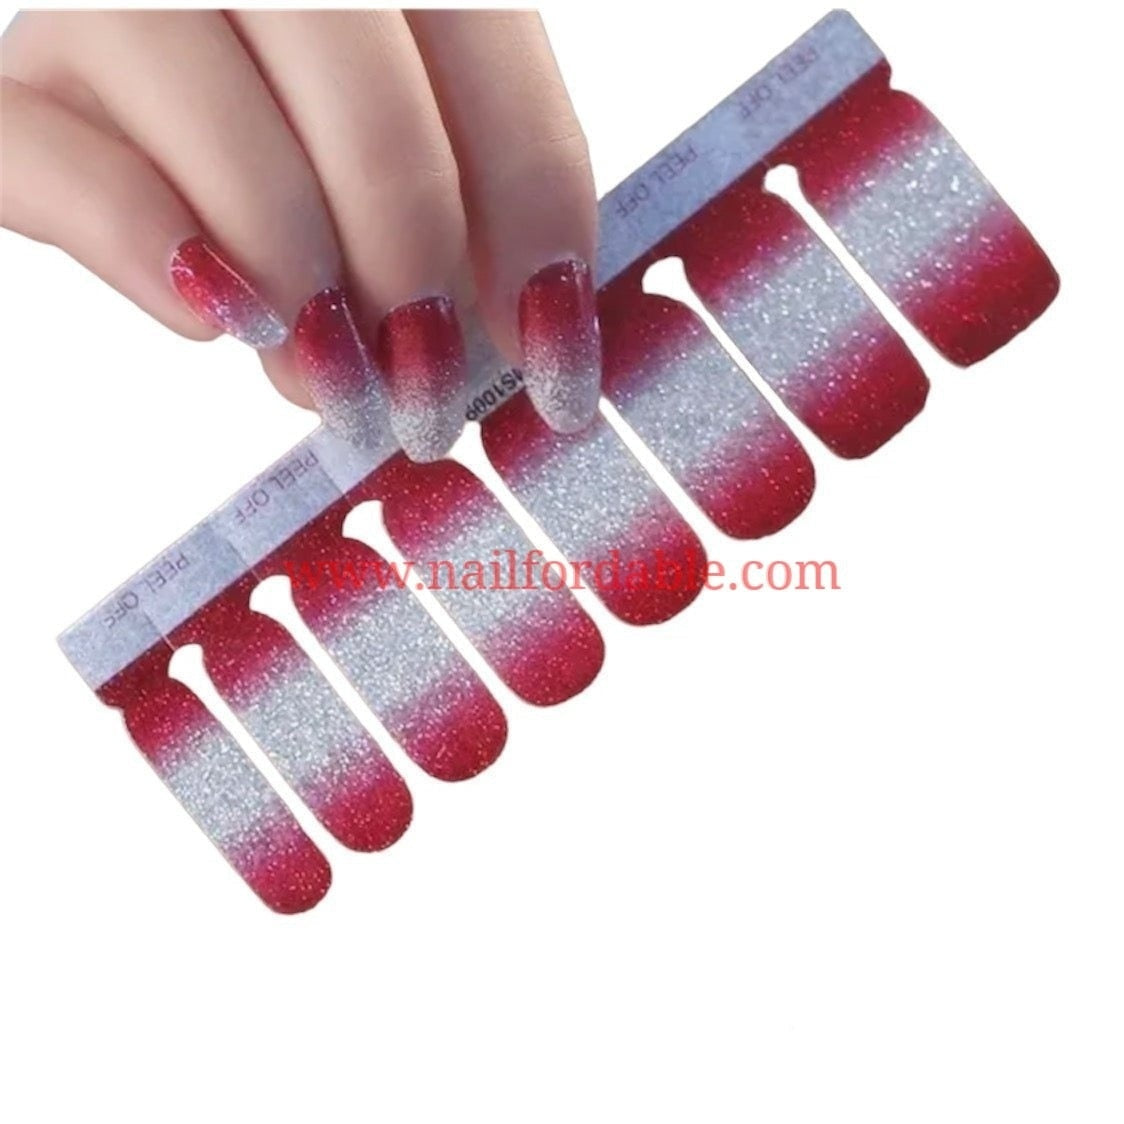 Red to silver gradient Nail Wraps | Semi Cured Gel Wraps | Gel Nail Wraps |Nail Polish | Nail Stickers